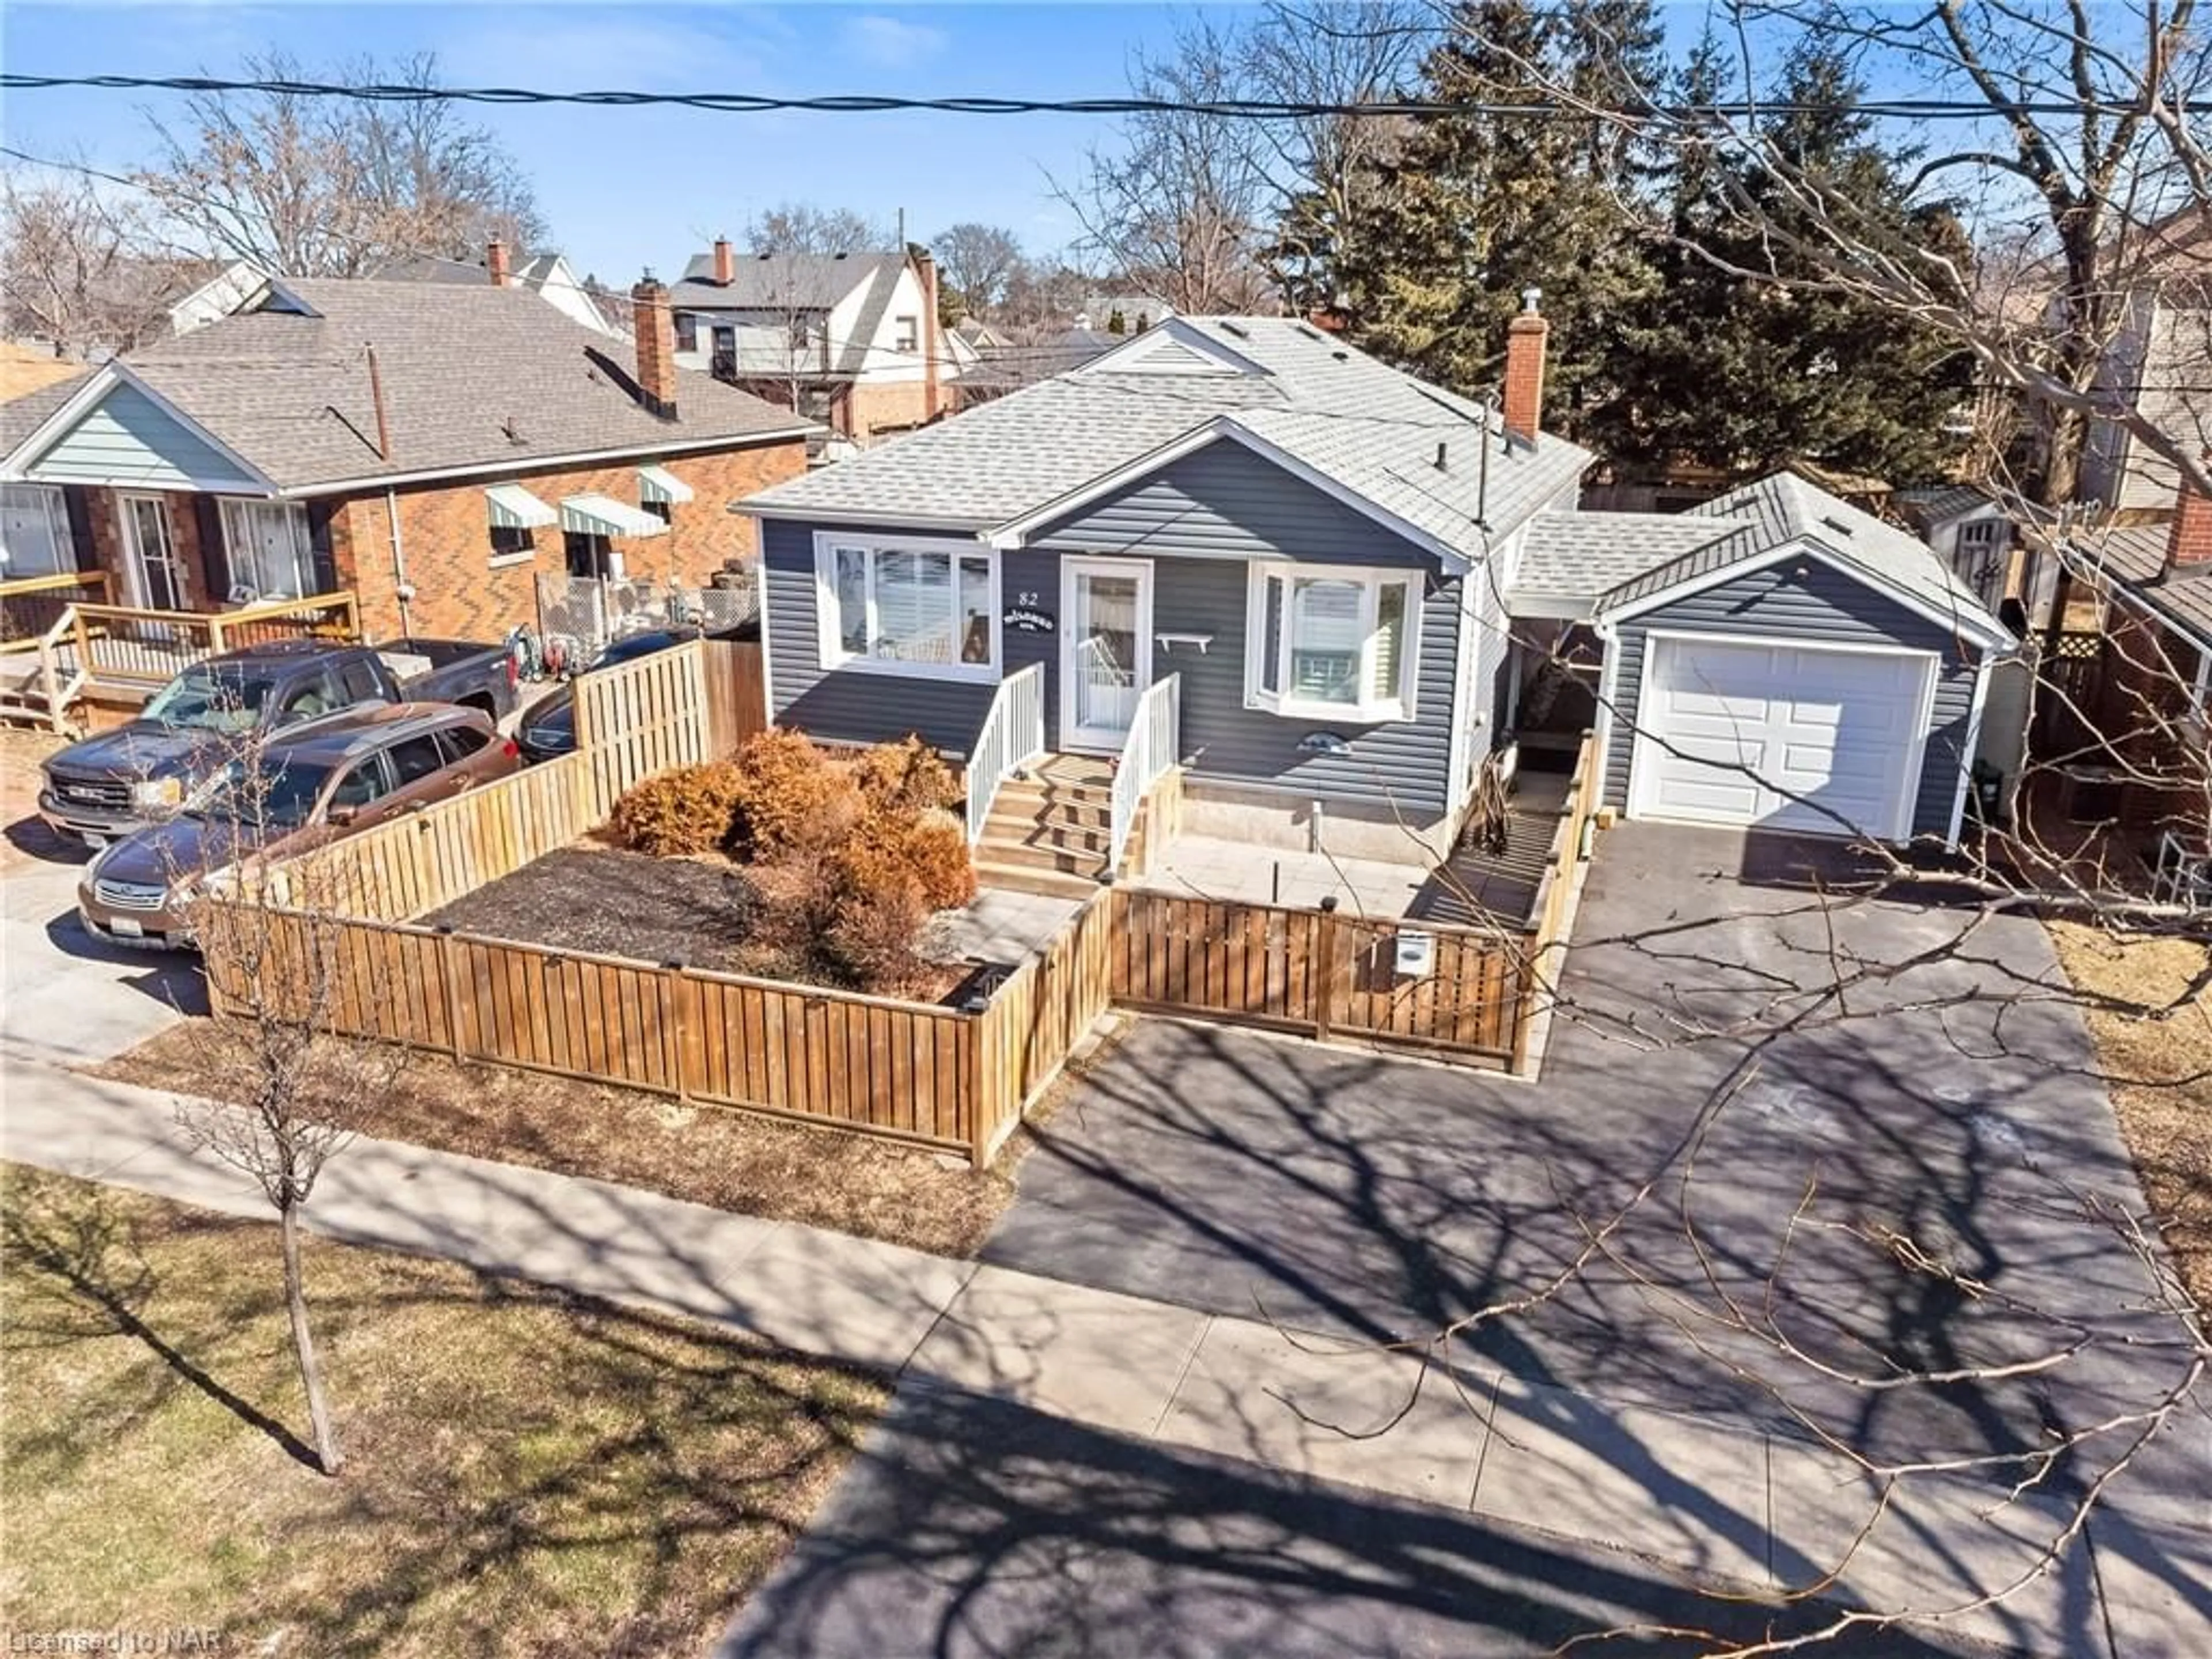 Frontside or backside of a home for 82 Mildred Ave, St. Catharines Ontario L2R 6J3